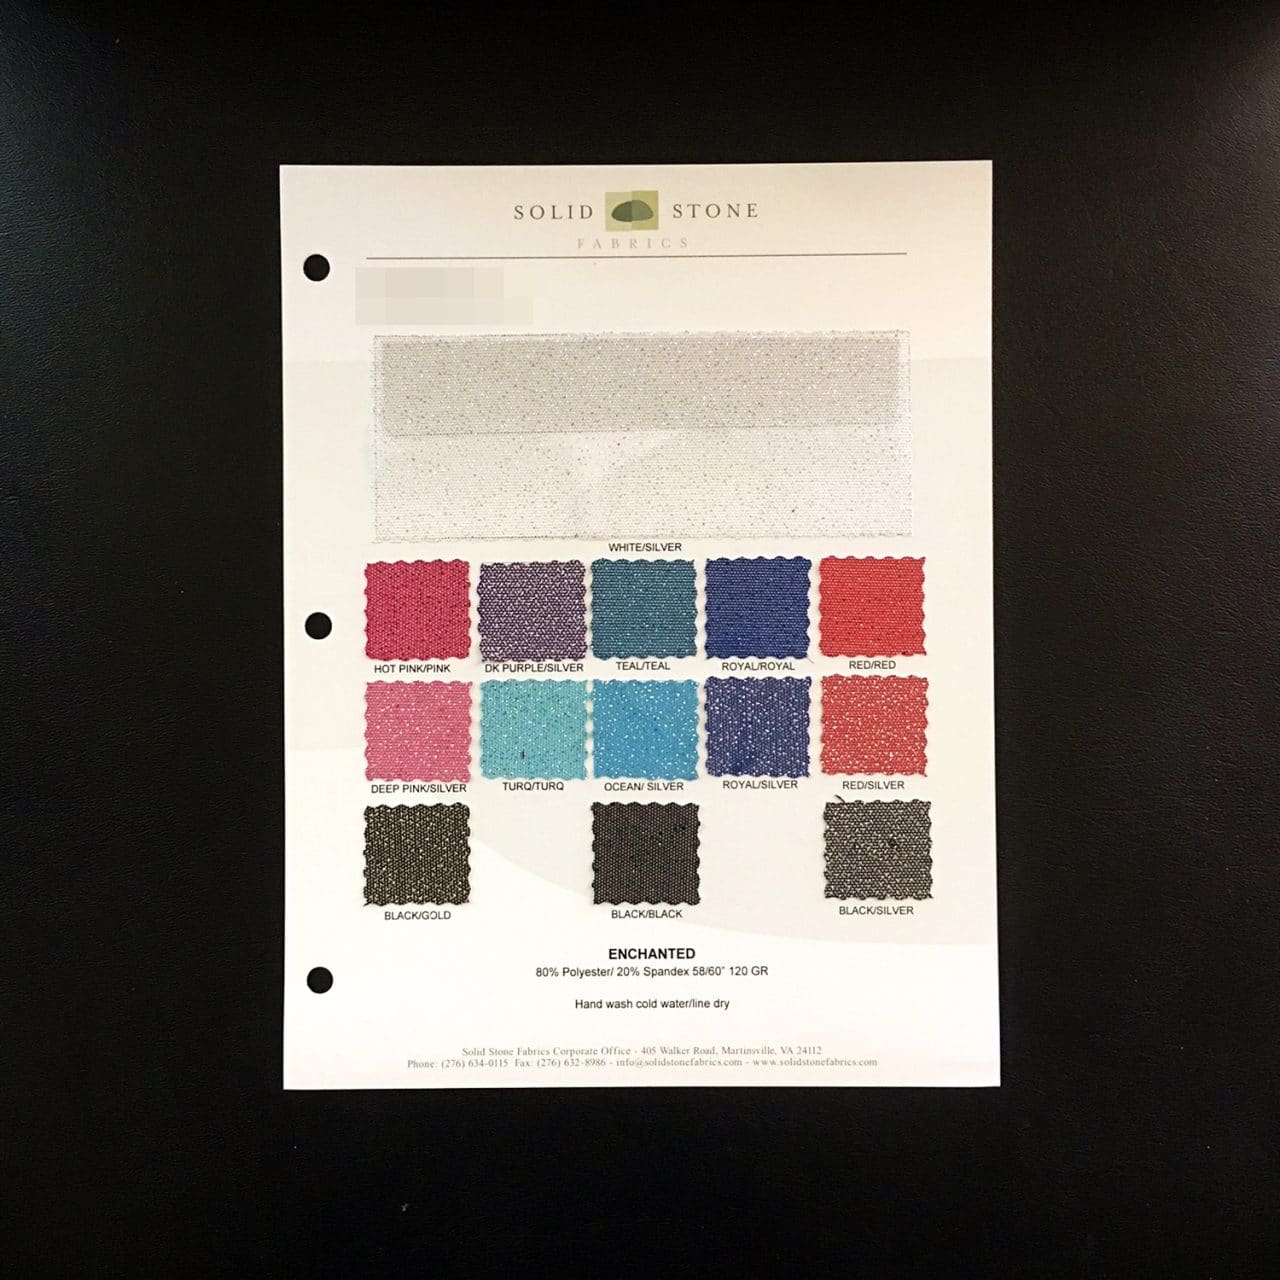 Glitter Mesh Fabric Swatches / Color card features full size "feeler" fabric swatches and all available fabric colors on one card for your convenience. Designed to fit inside a three ring binder for easy reference!